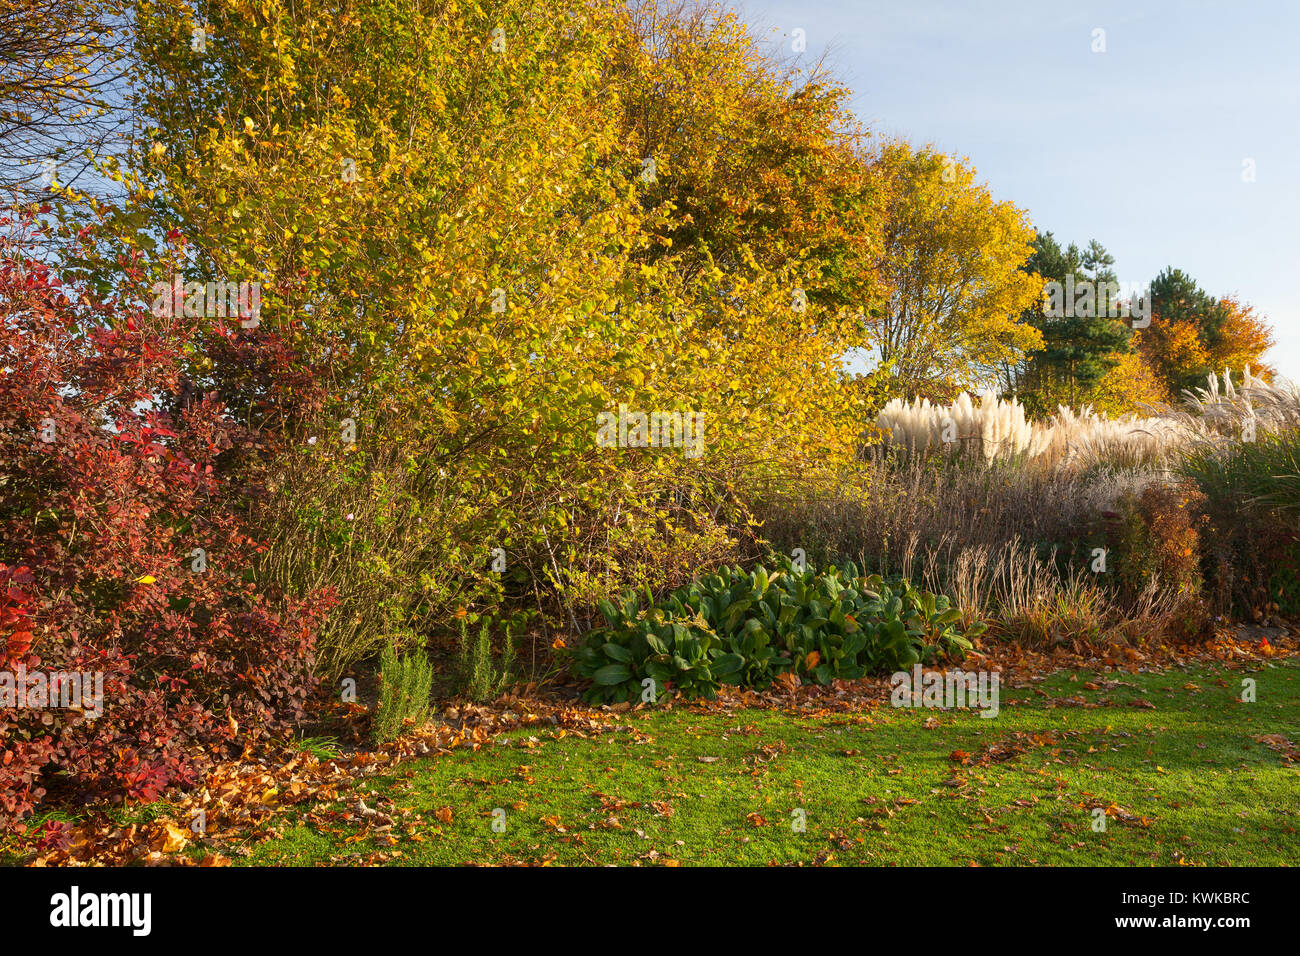 Brightwater Gardens, Saxby, Lincolnshire, UK. Autumn, October 2017. Stock Photo